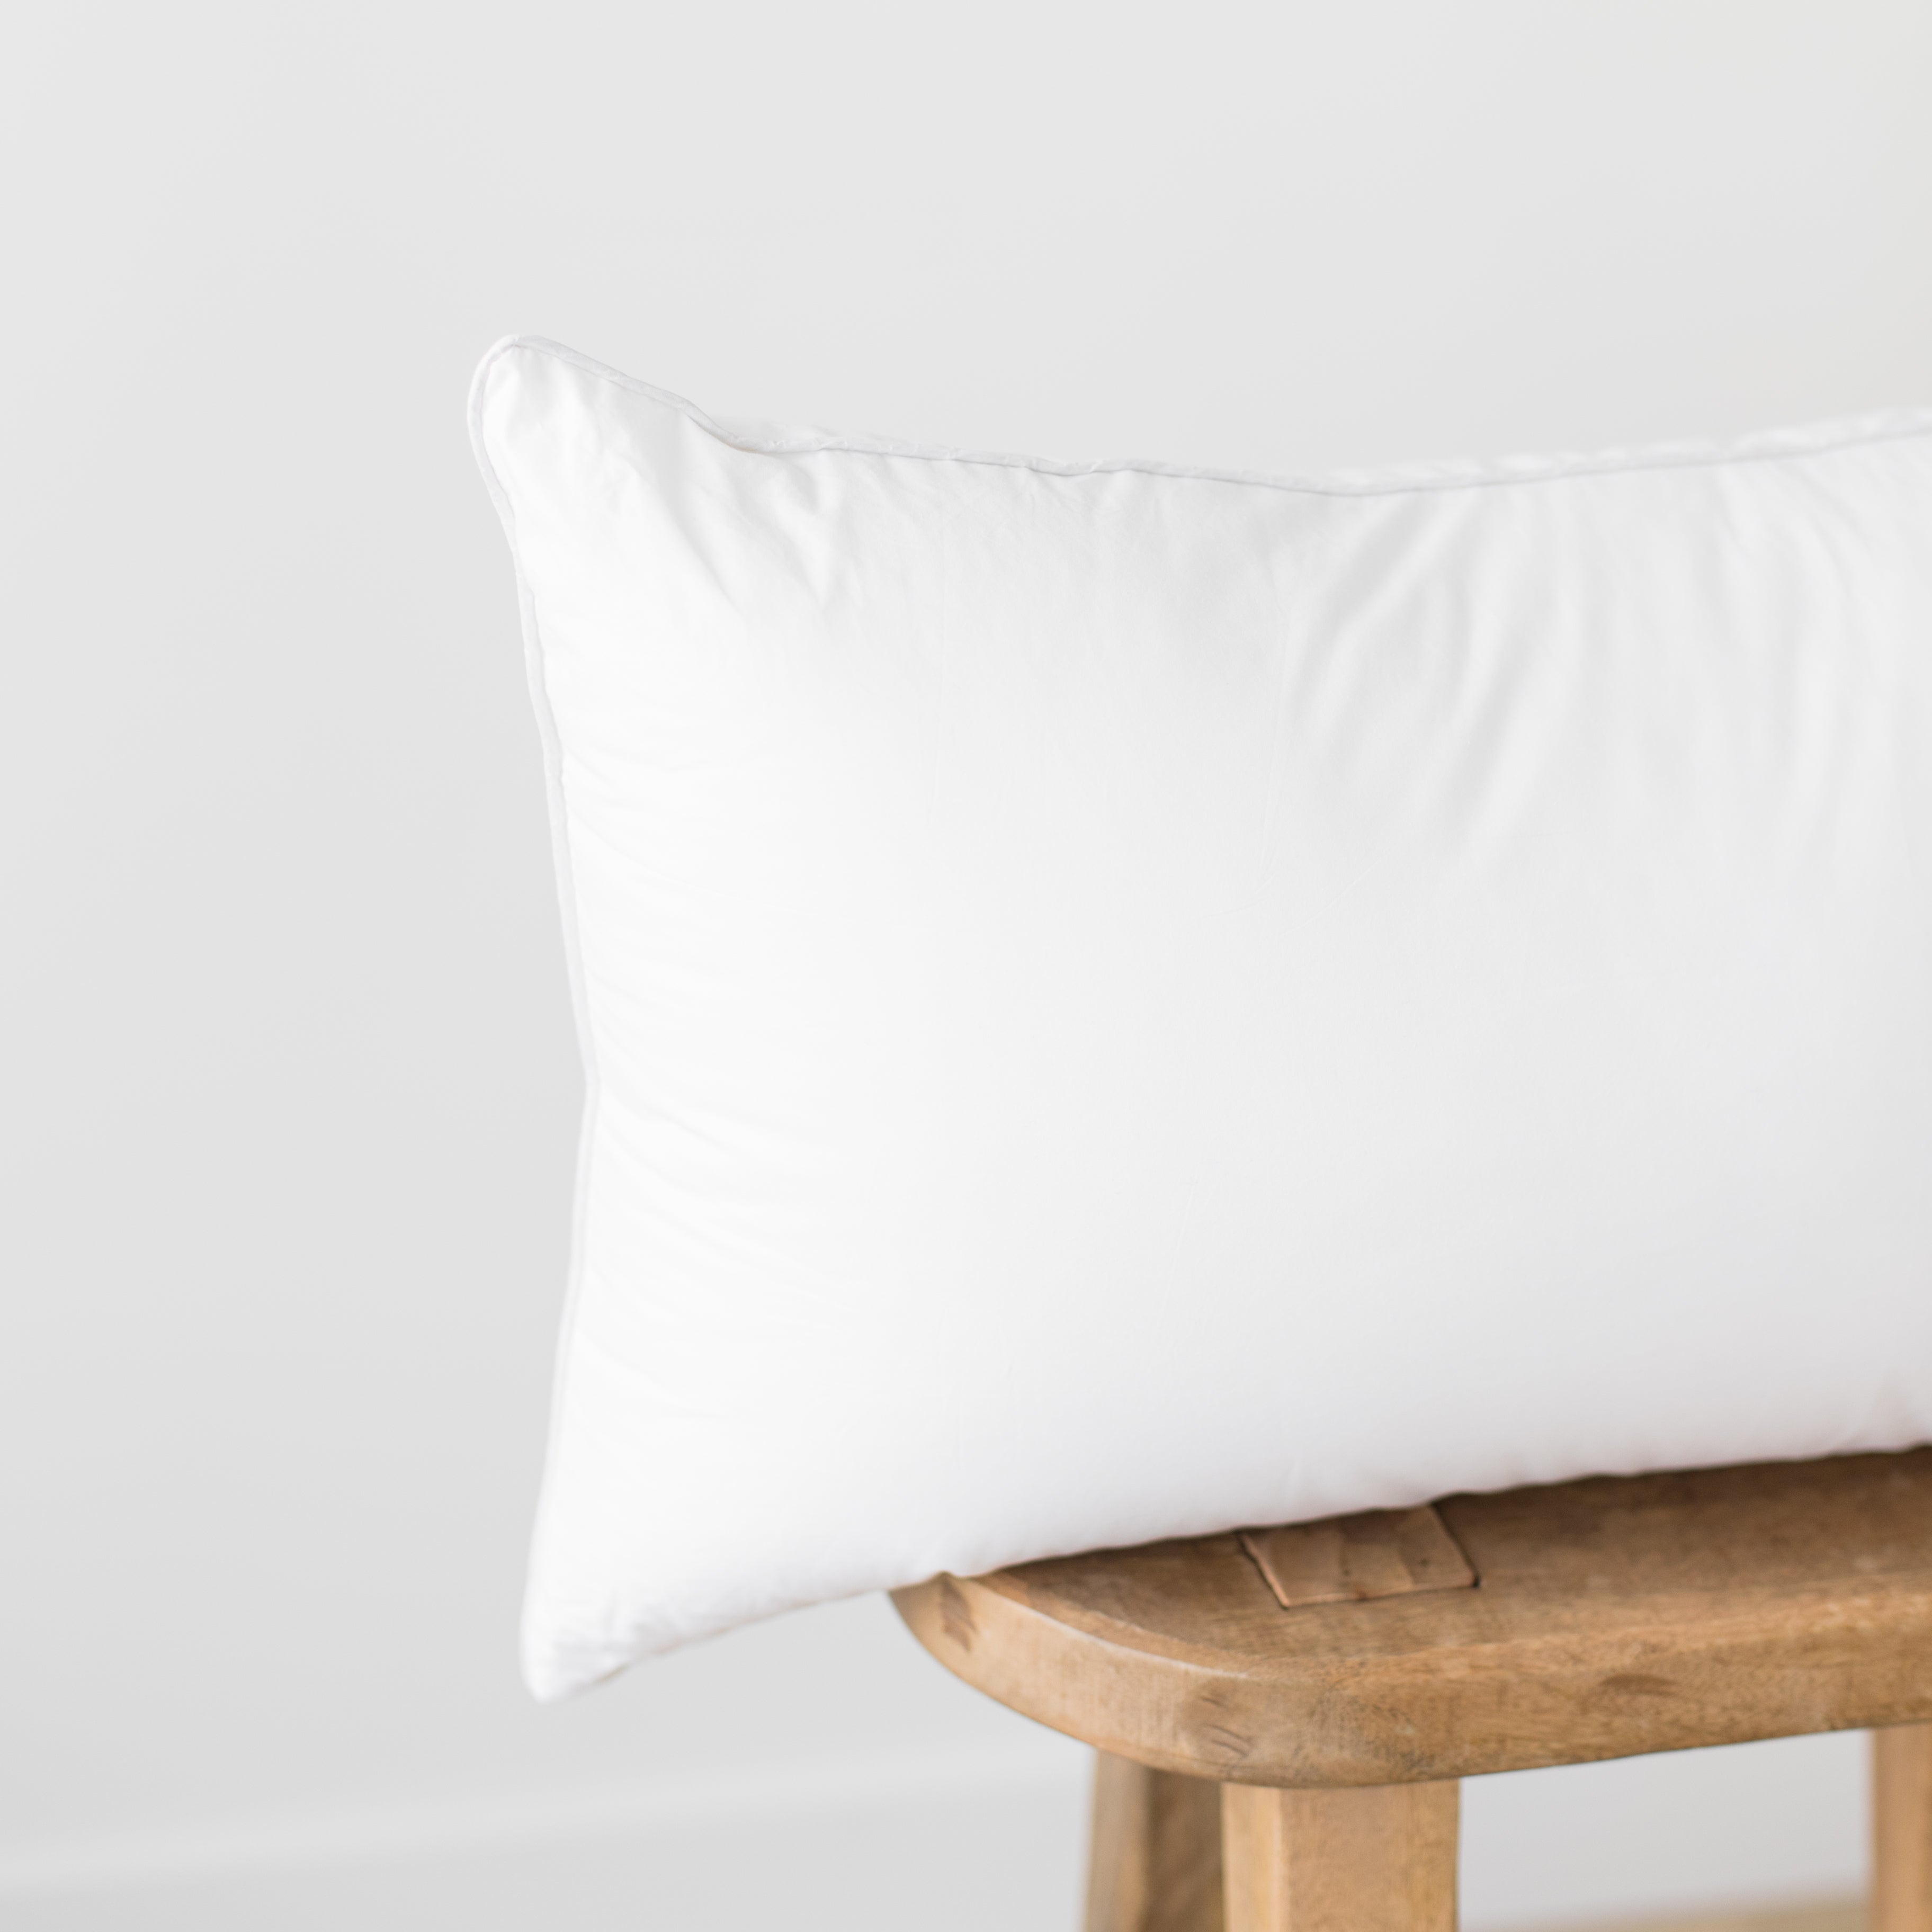 Demina Square Pillow Cover & Insert Size: 26 H x 26 W x 7 D